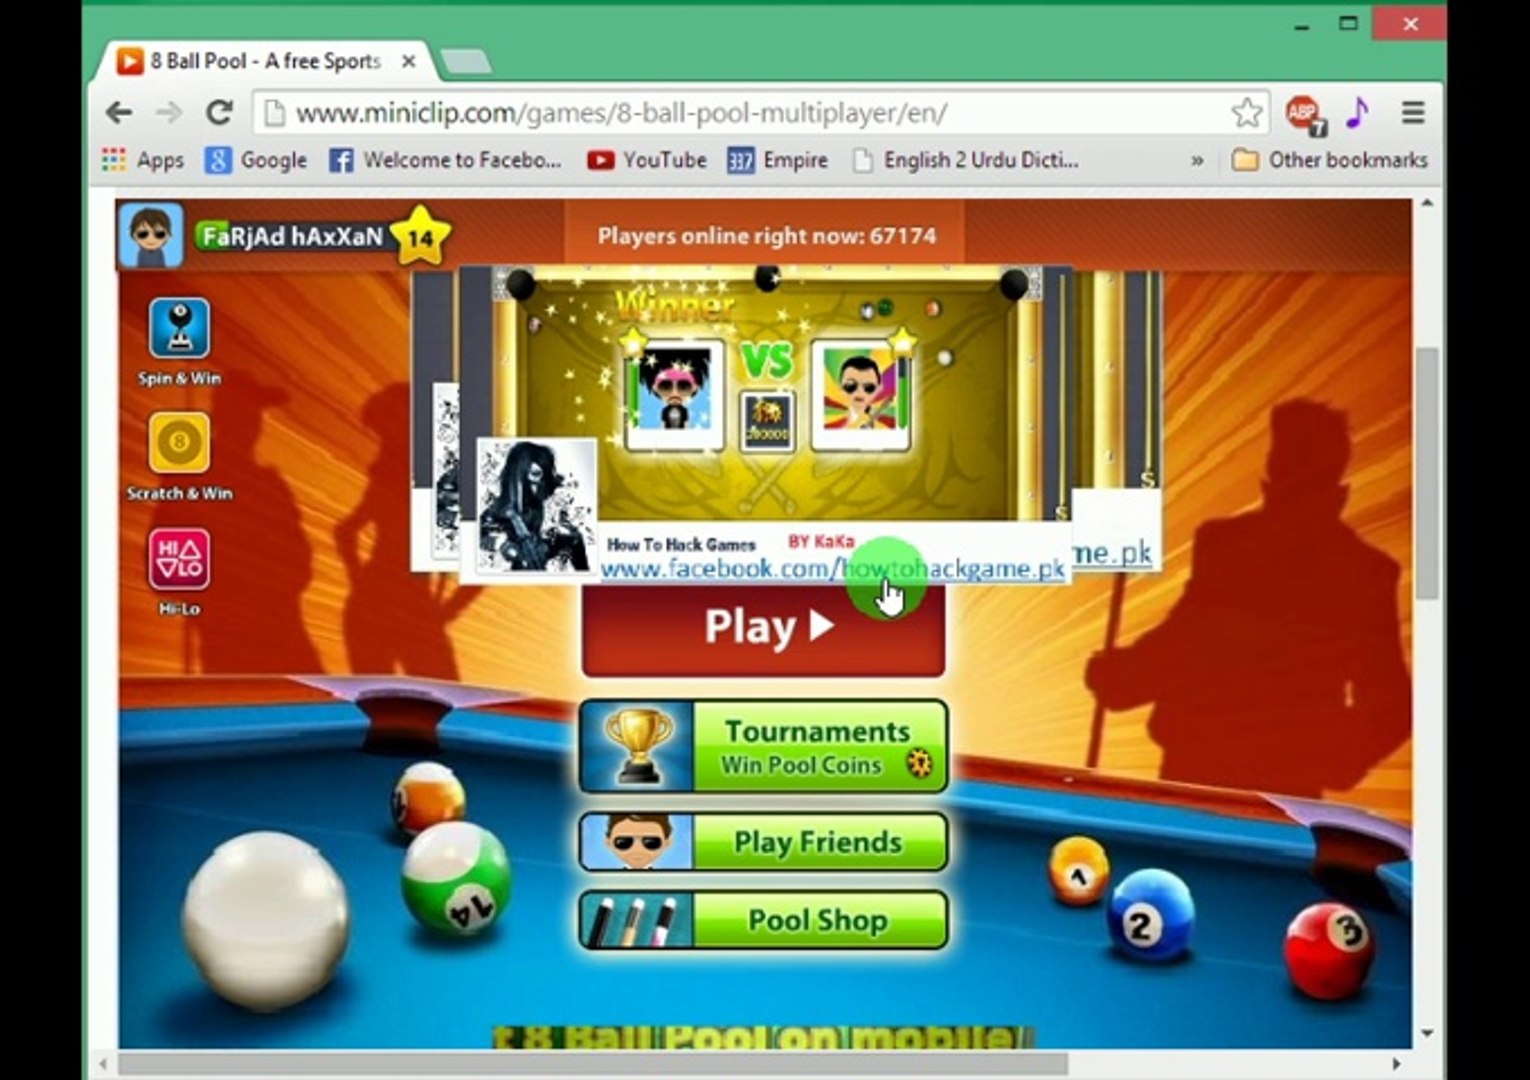 How To Get Longline In 8 Ball Pool Full Tutorial Video Dailymotion